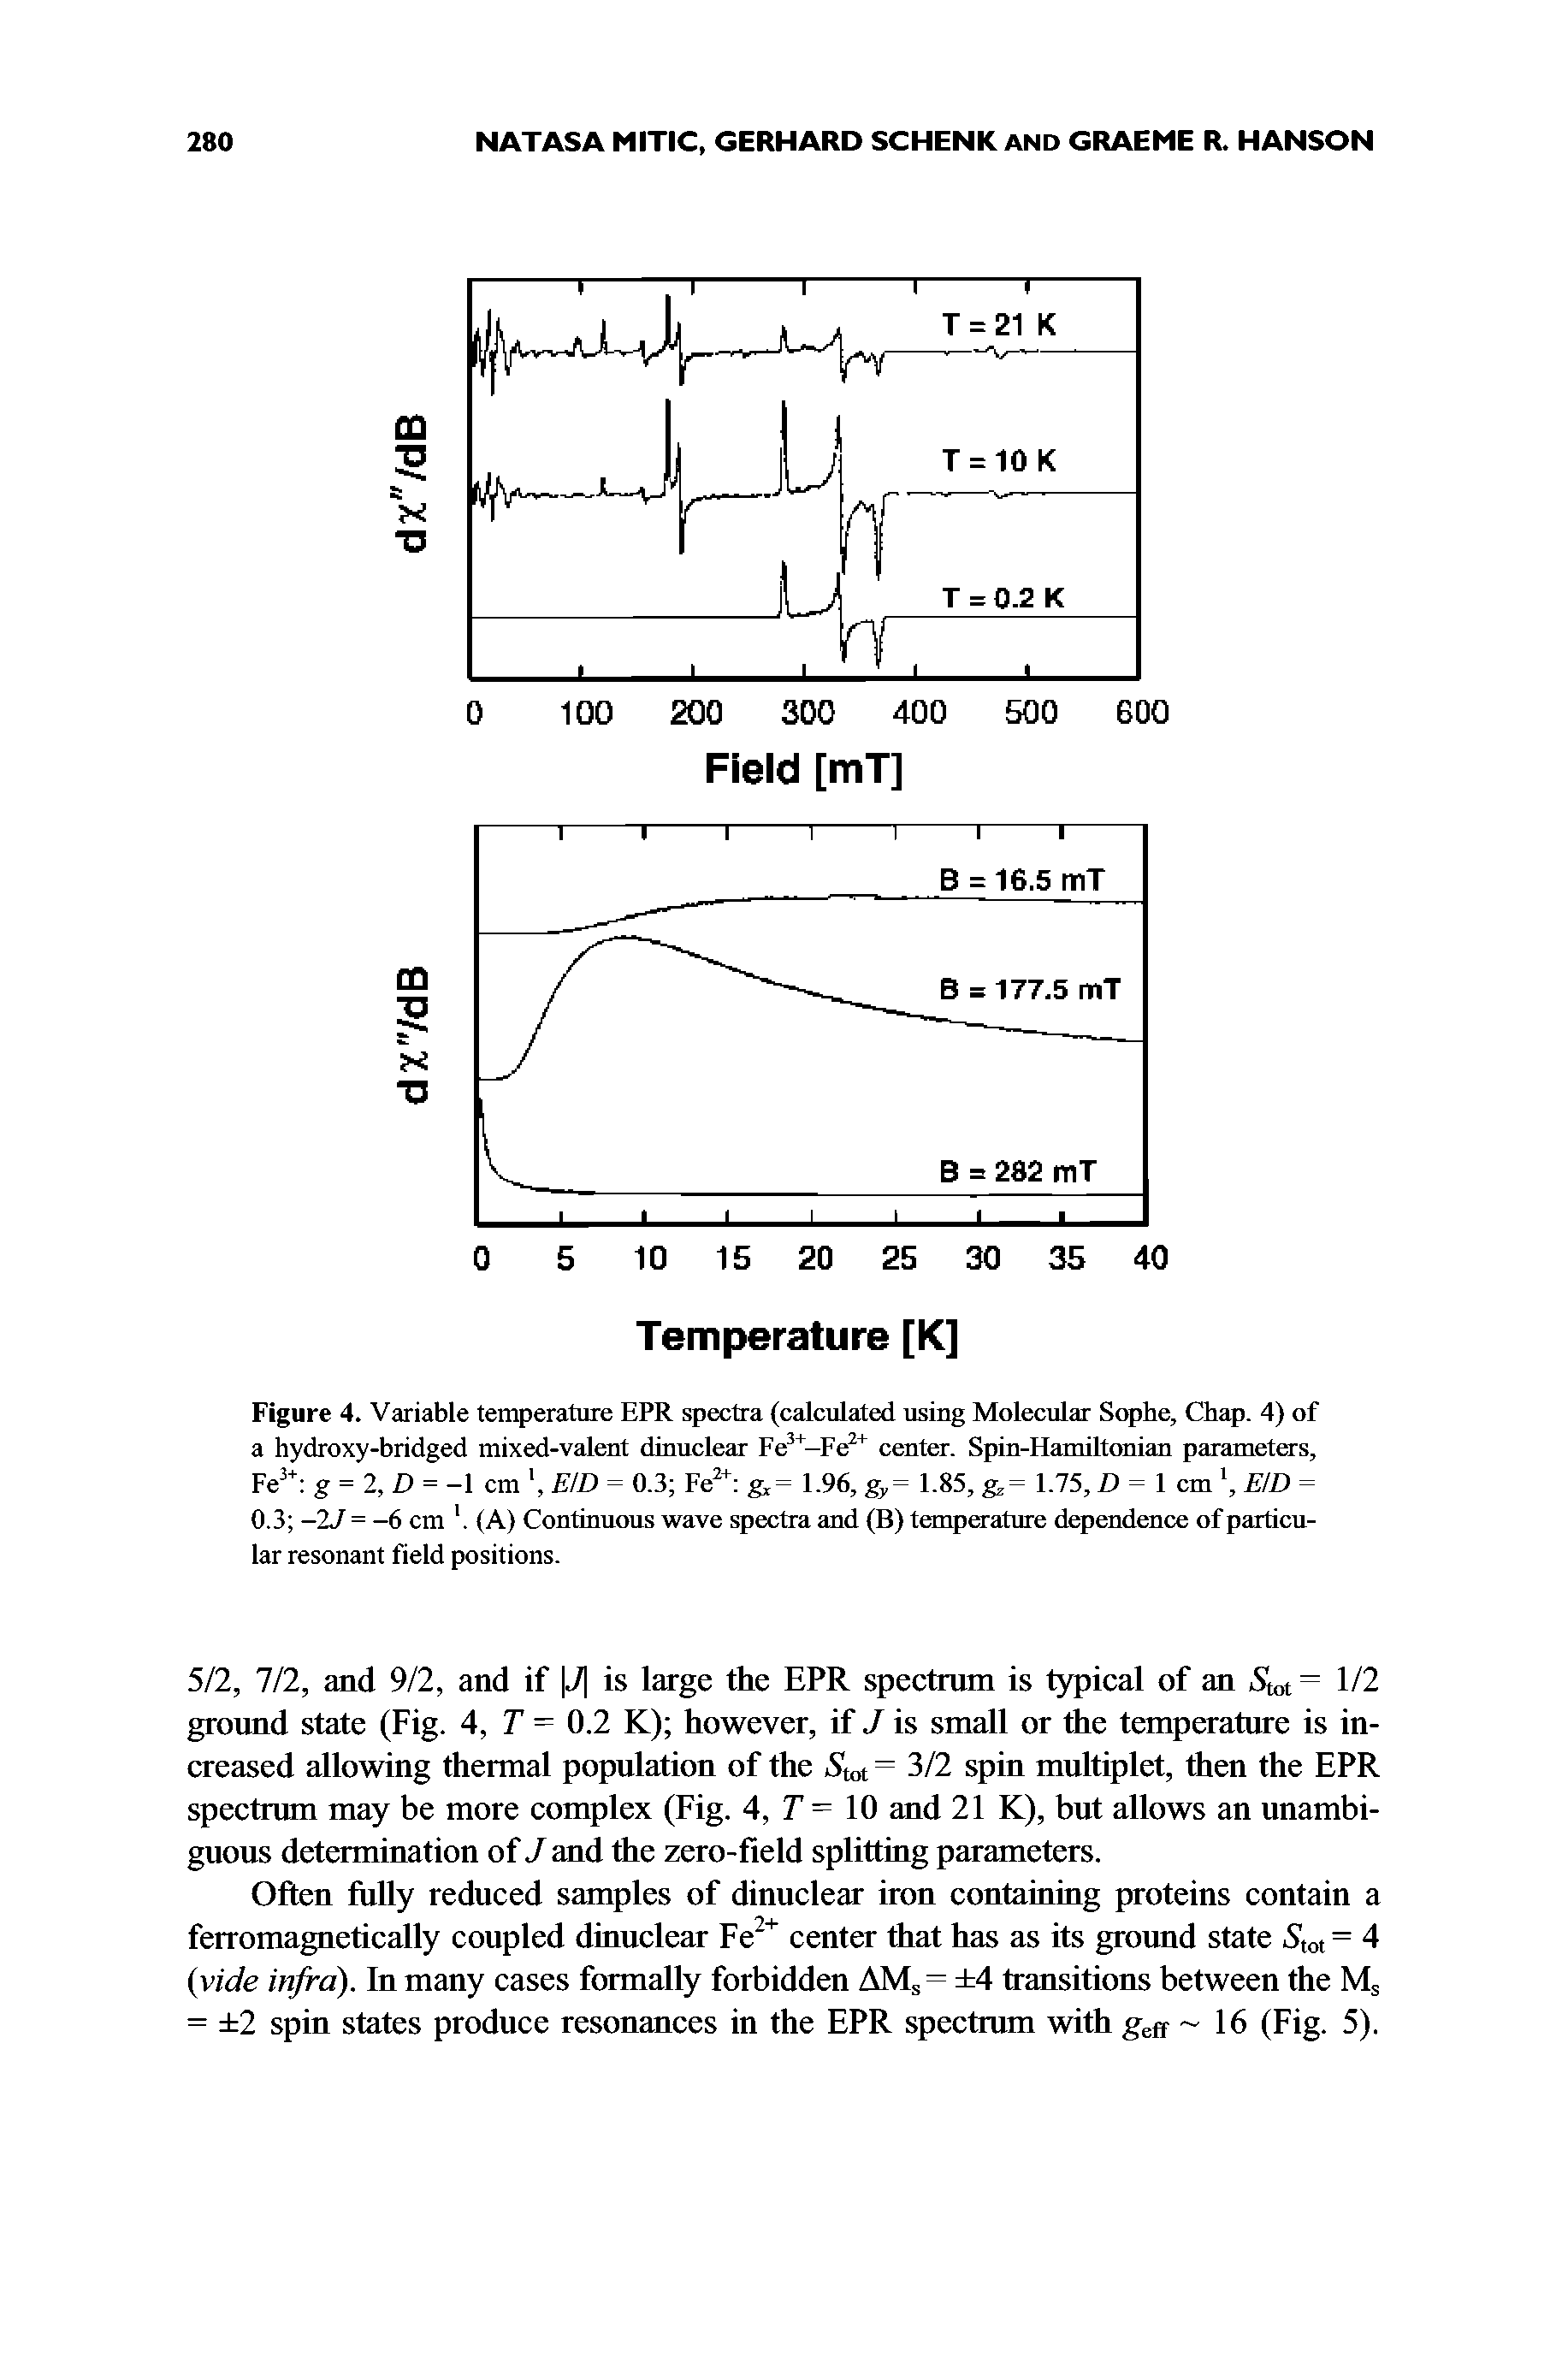 Figure 4. Variable temperature EPR spectra (calculated using Molecular Sophe, Chap. 4) of a hydroxy-bridged mixed-valent dinuclear Fe -Fe center. Spin-Hamiltonian parameters, Fe g = 2, D = -1 cm EID = 0.3 Fe " = 1.96, g,= 1.85, = 1.75, Z) = 1 cm, EID = 0.3 -2J = -6 cm. (A) Continuous wave spectra and (B) temperature dependence of particular resonant field positions.